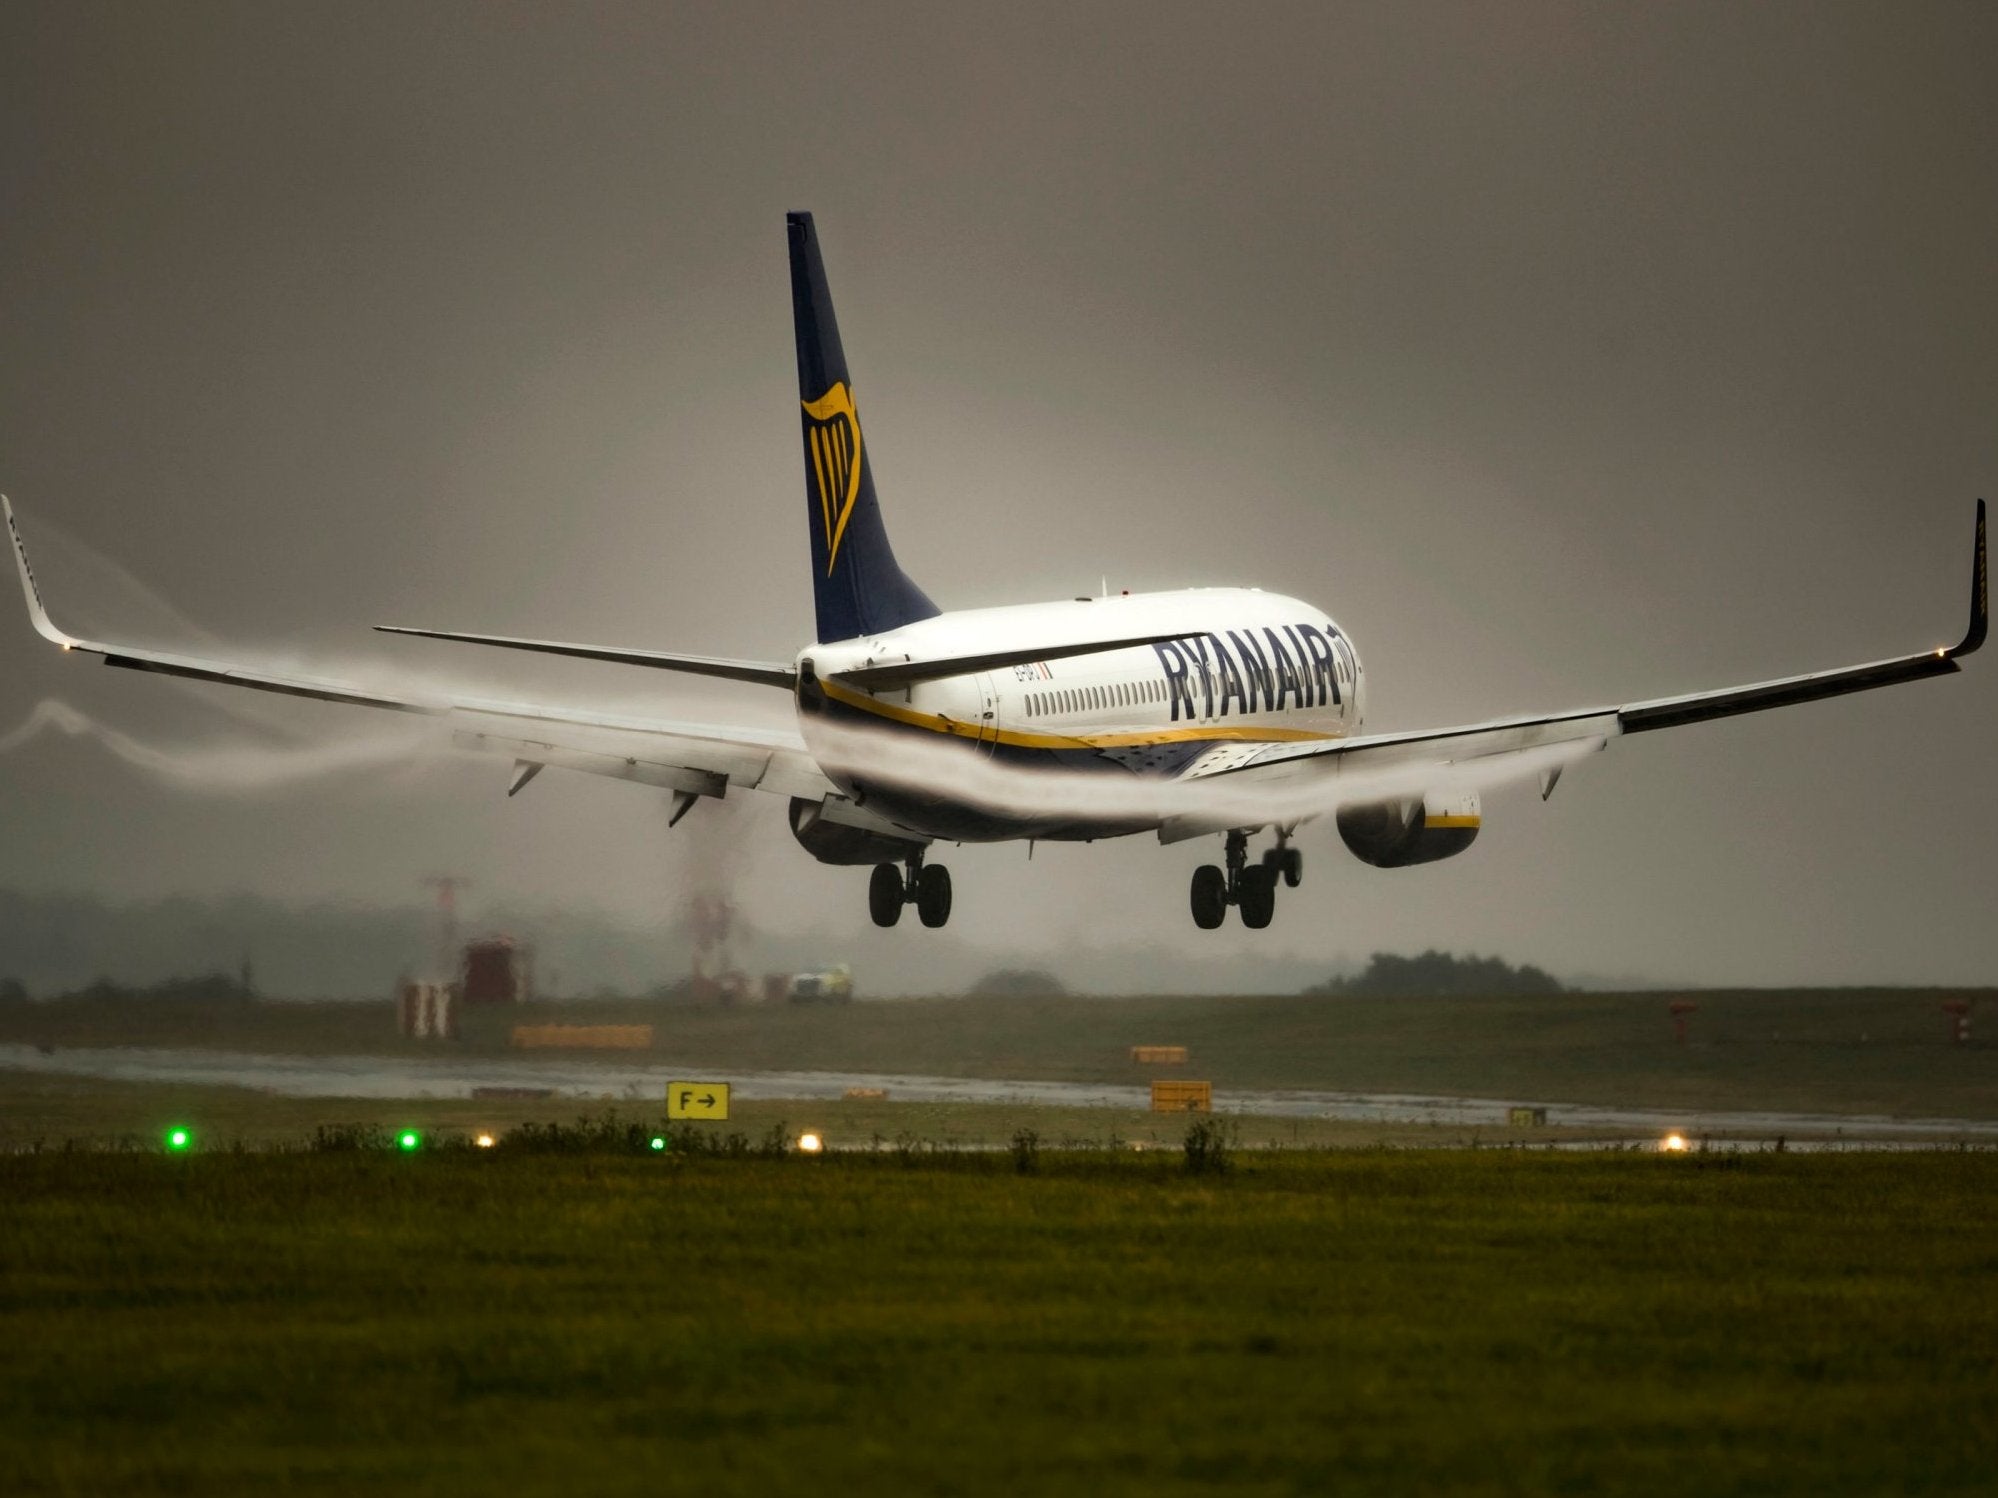 A Ryanair plane comes in to land in rainy conditions at Leeds Bradford Airport